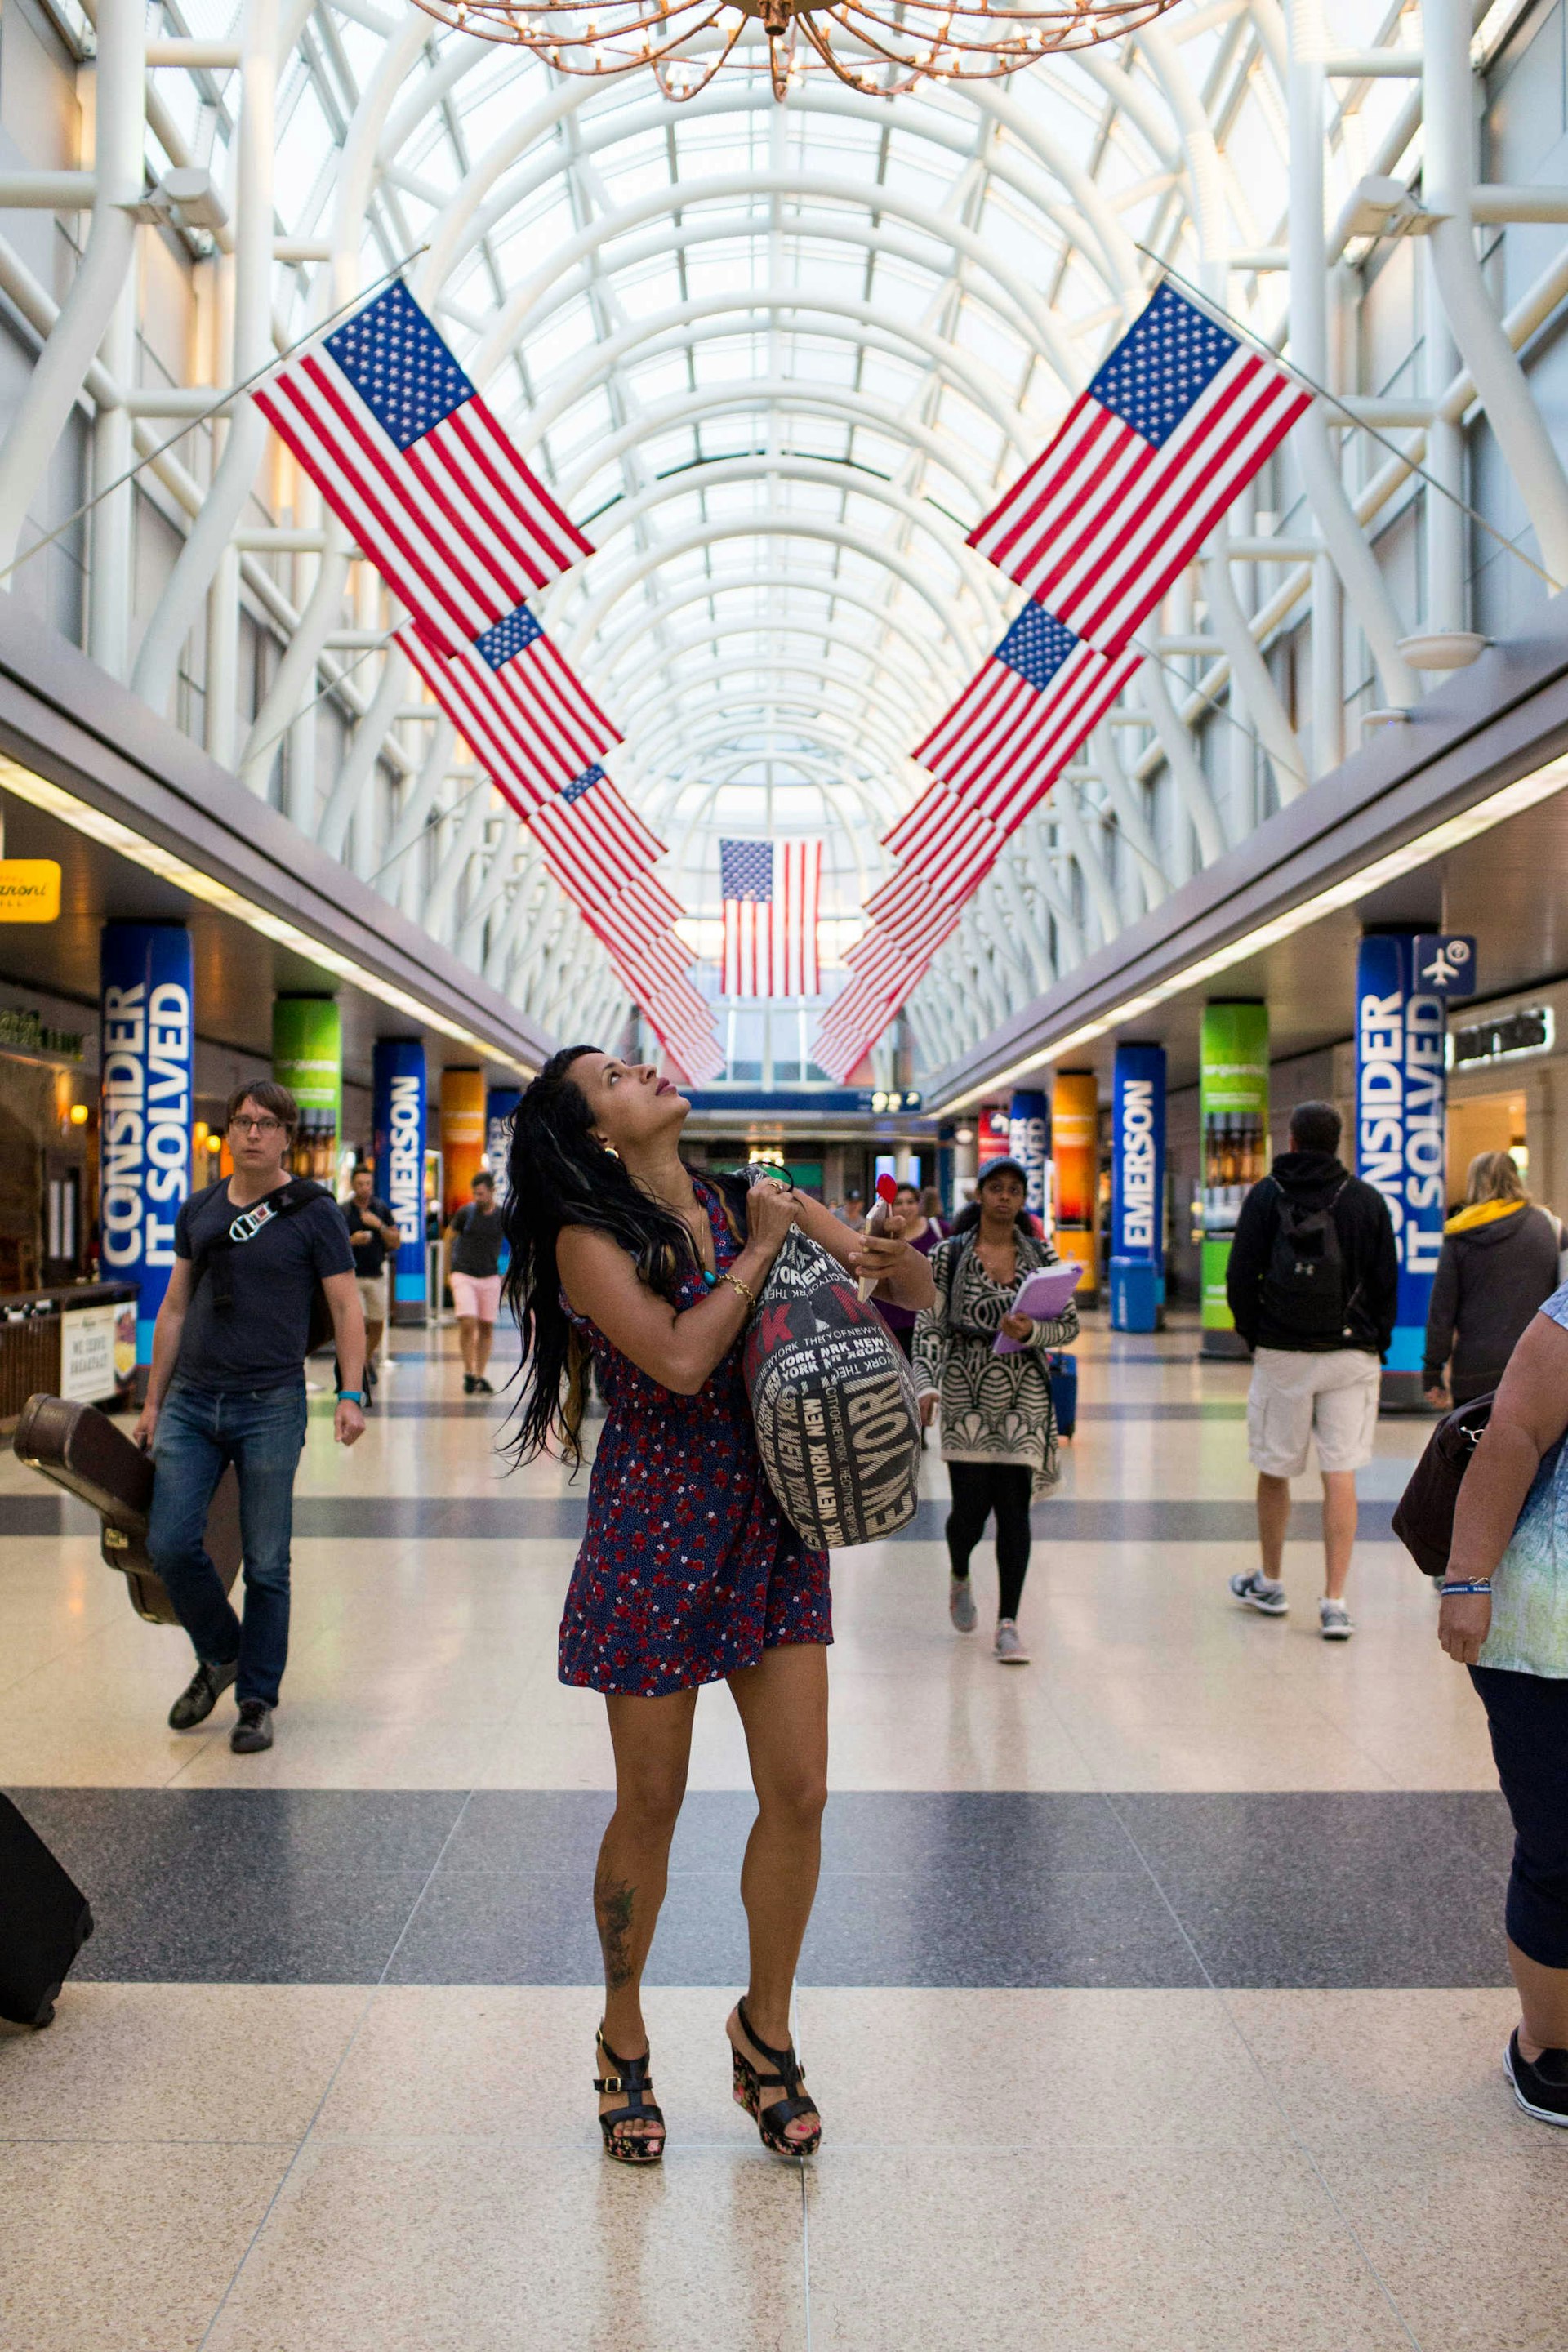 July 3, 2016 - Liset arrives at Chicago O'Hare International Airport to be reunited with her boyfriend, Joey, who she met in Cuba back in January and paid for her trip to go to the Unites States.